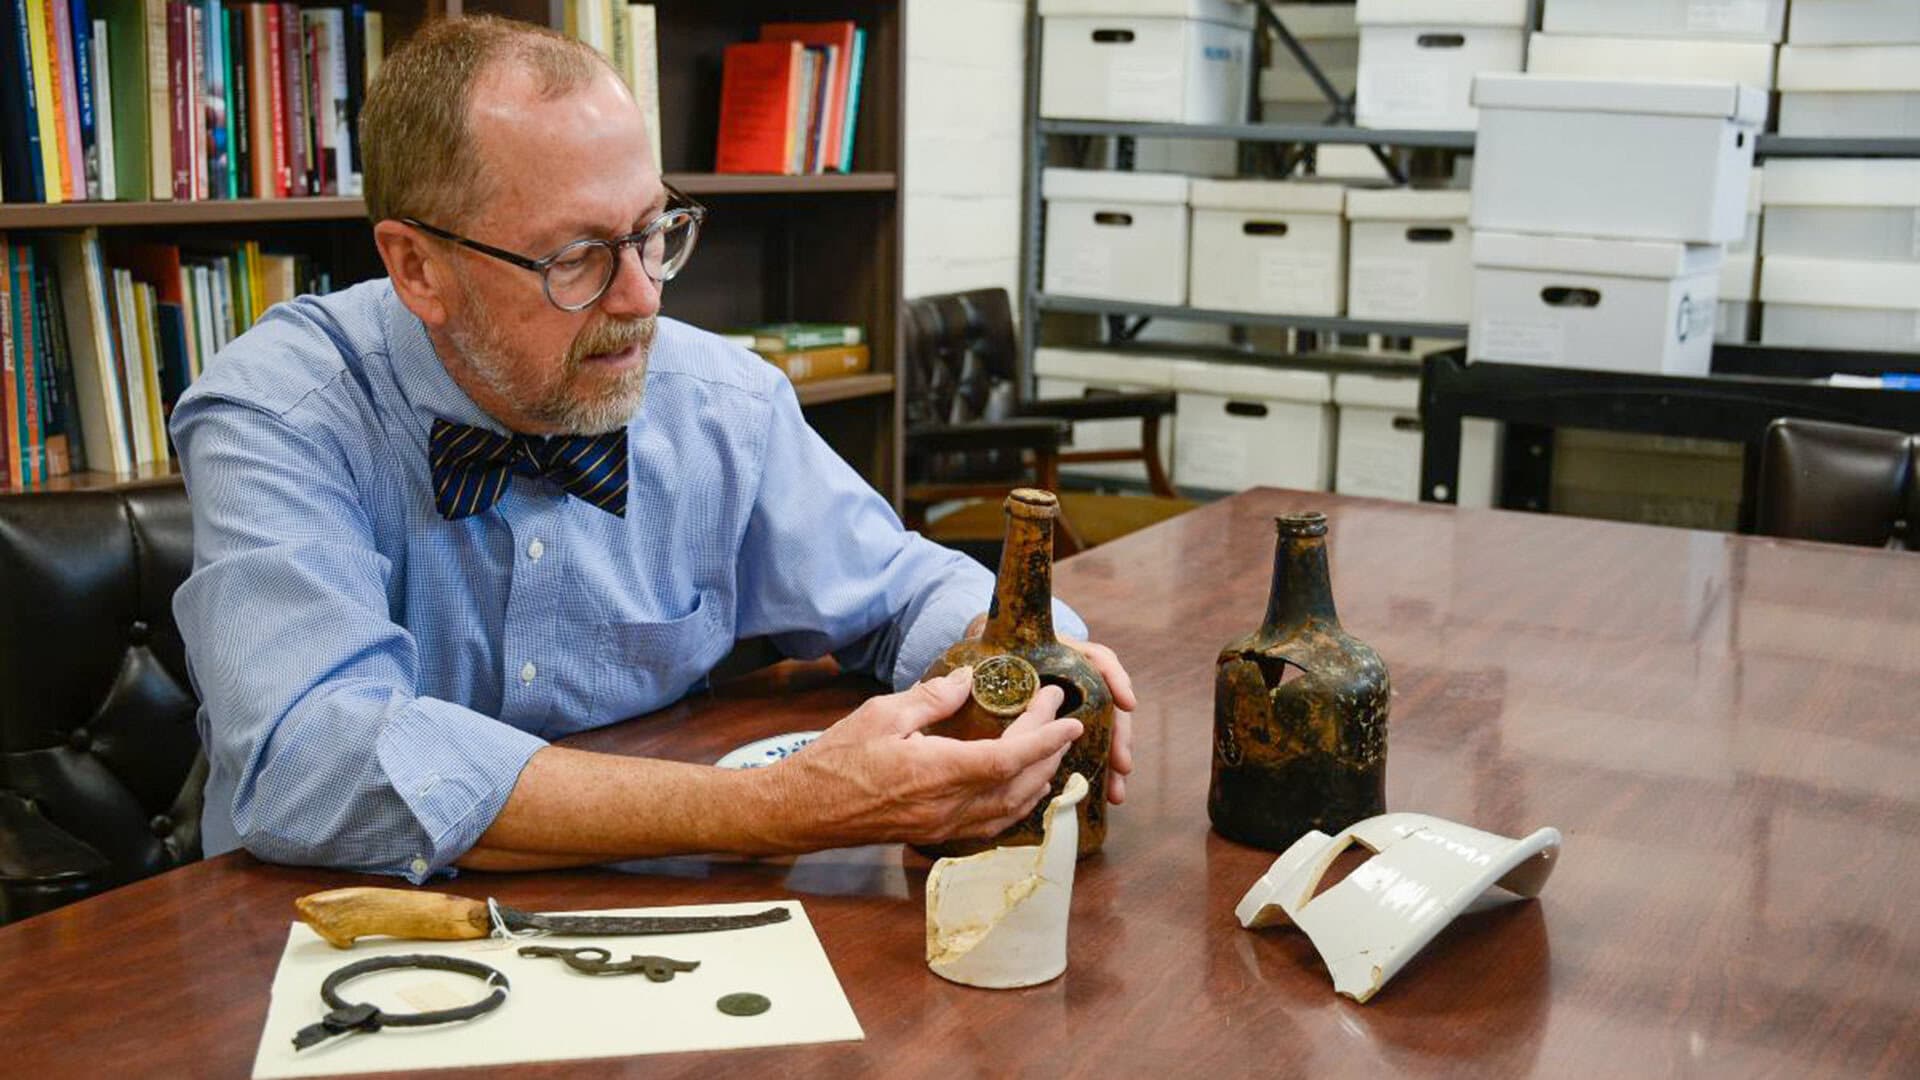 Interim Dean Donald Linebaugh working with artifacts from the Kippax Plantation Archaeological Site.